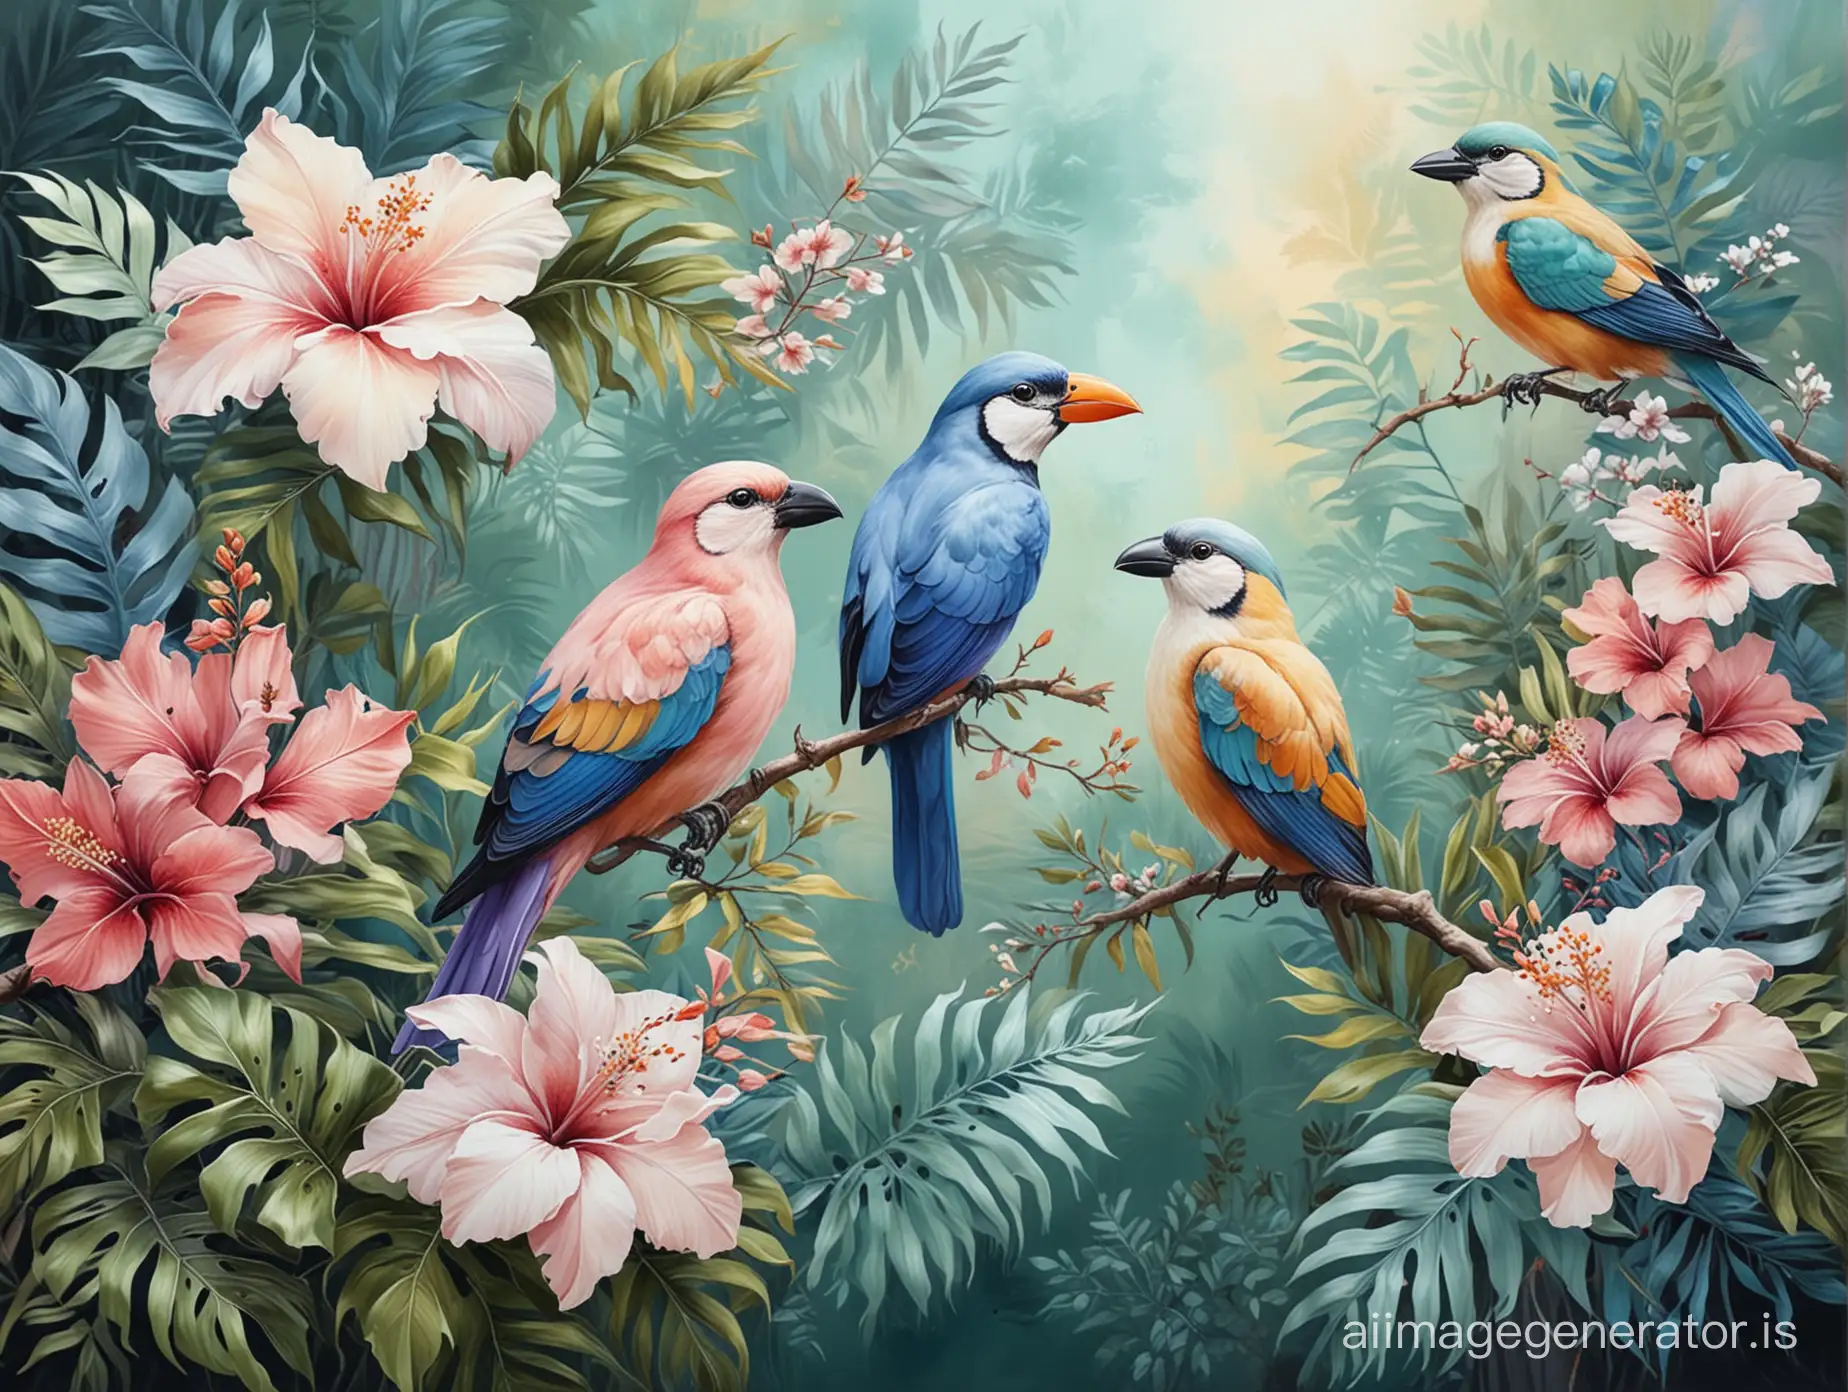 Exquisite-Realistic-Acrylic-Painting-of-Tropical-Birds-and-Flowers-on-Elegant-Pastel-Background